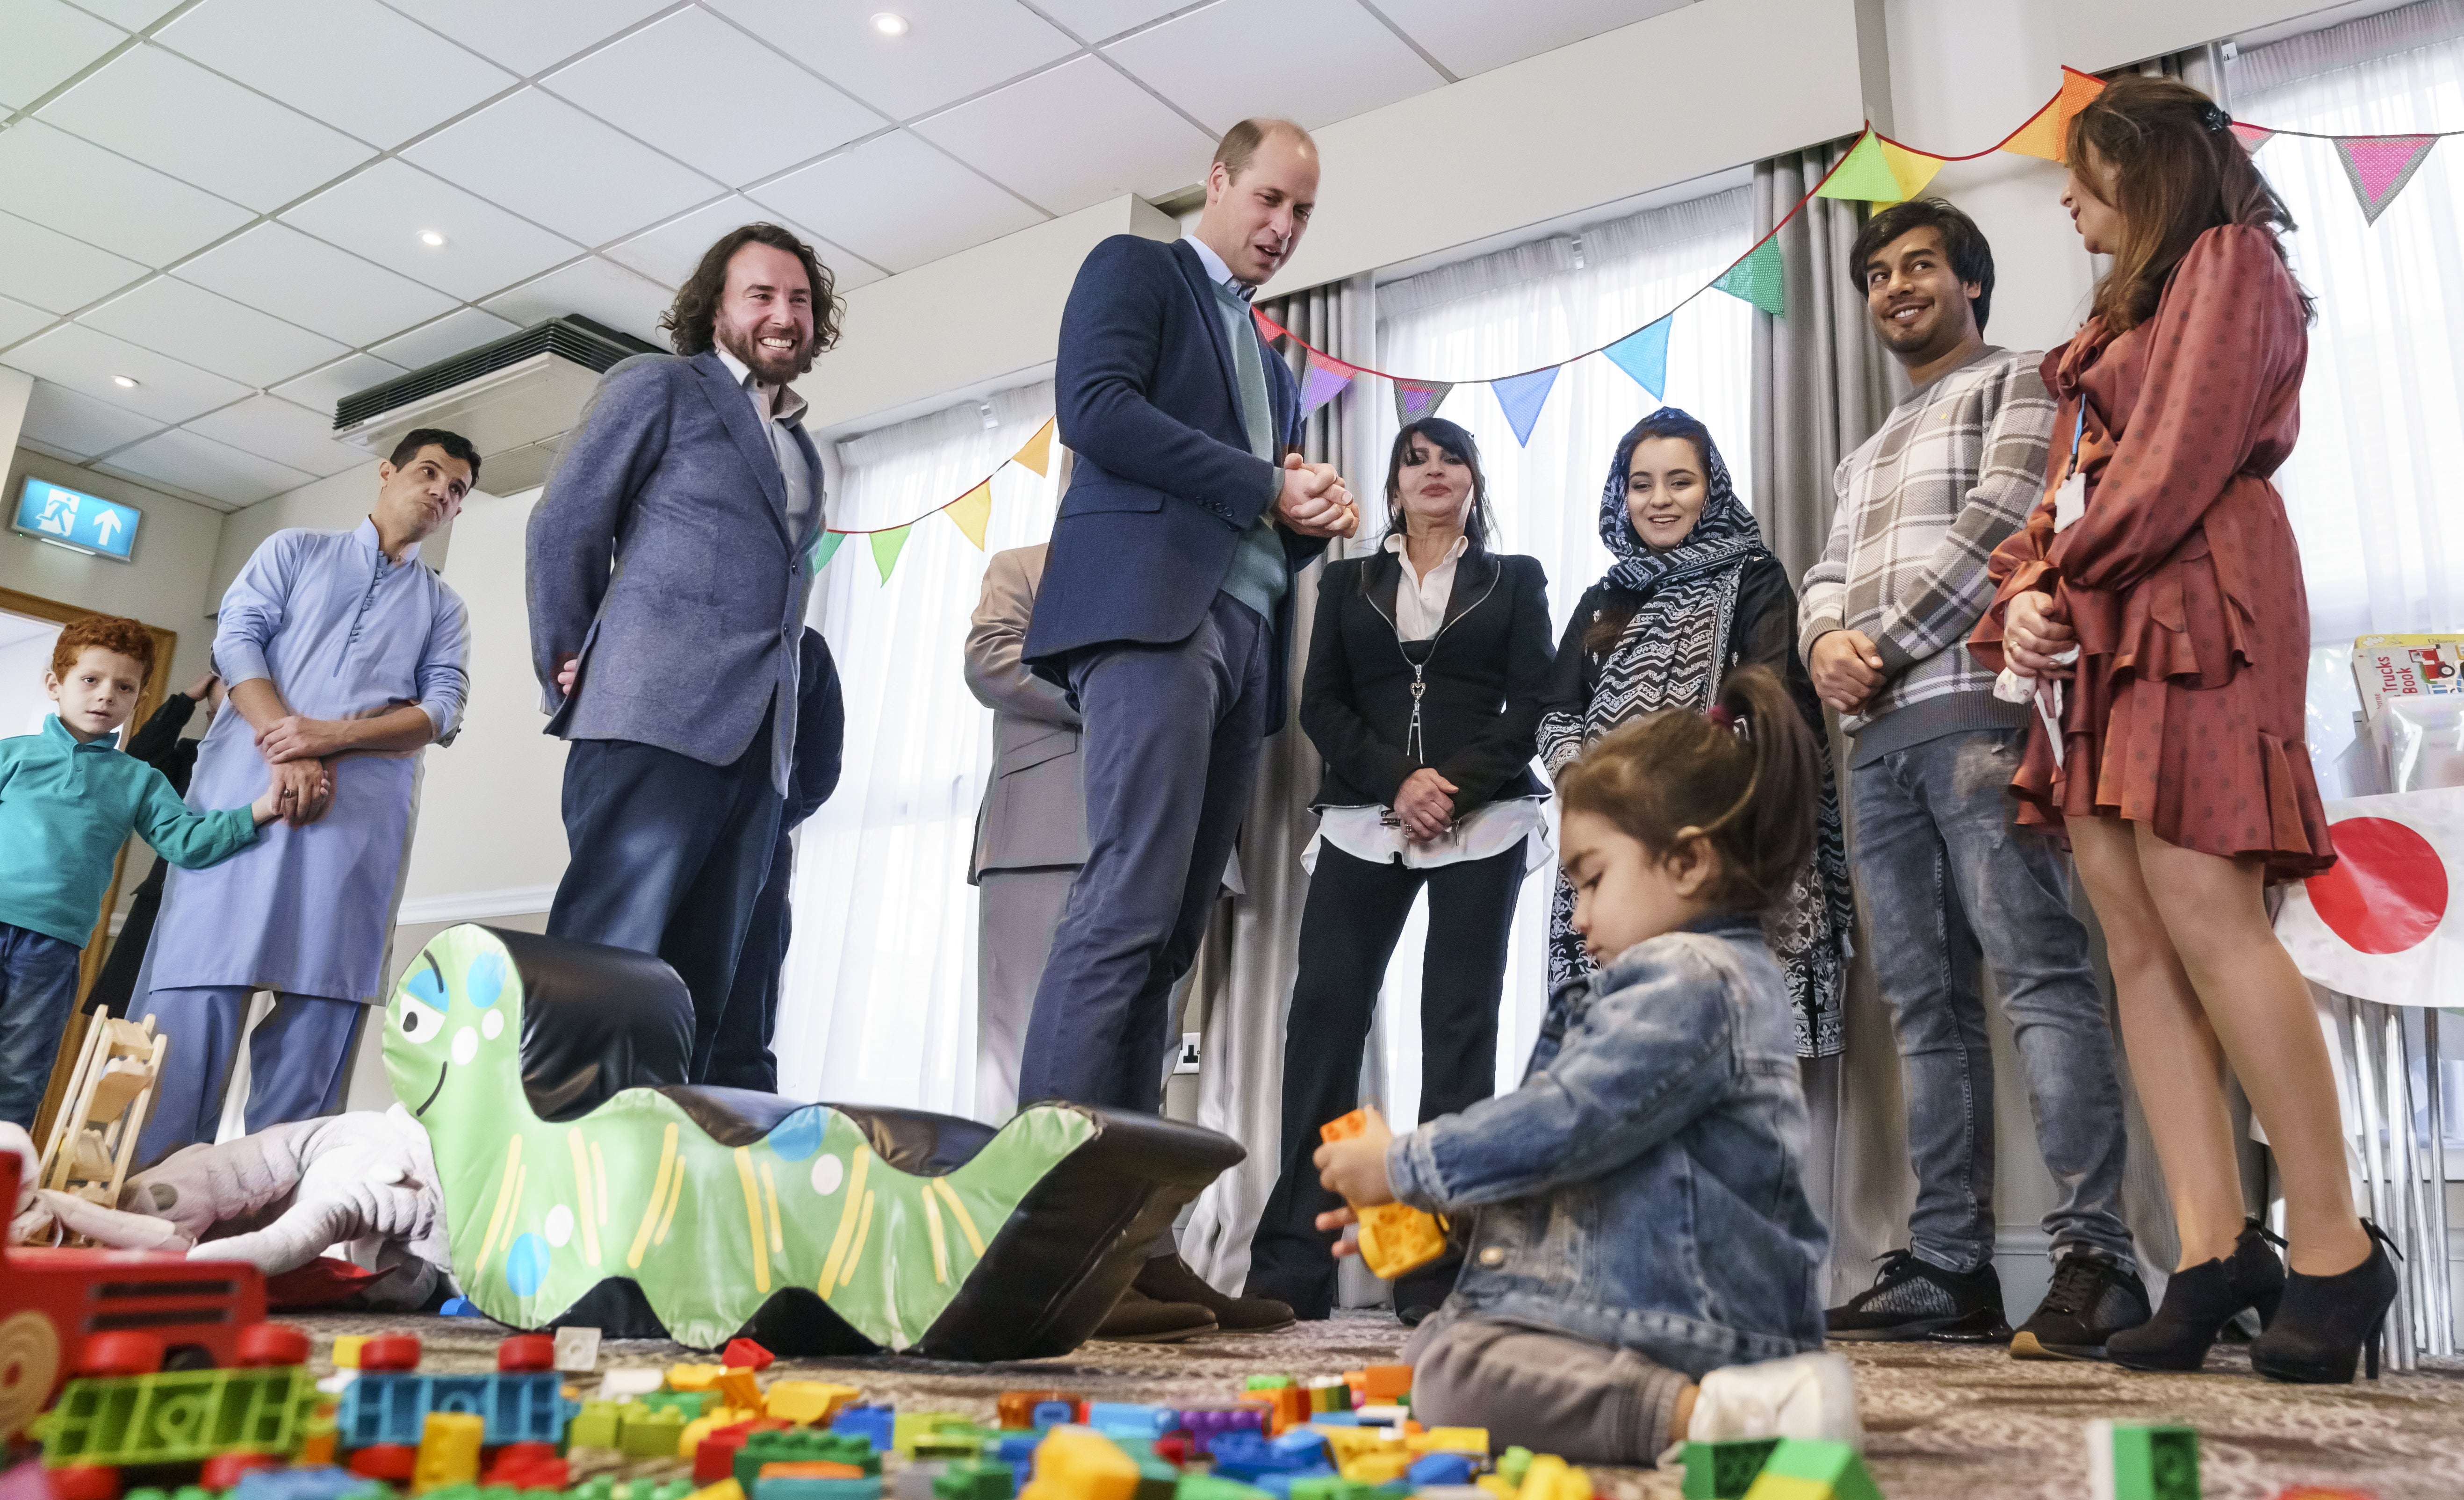 The Duke of Cambridge watched young children play during the visit (Danny Lawson/PA)